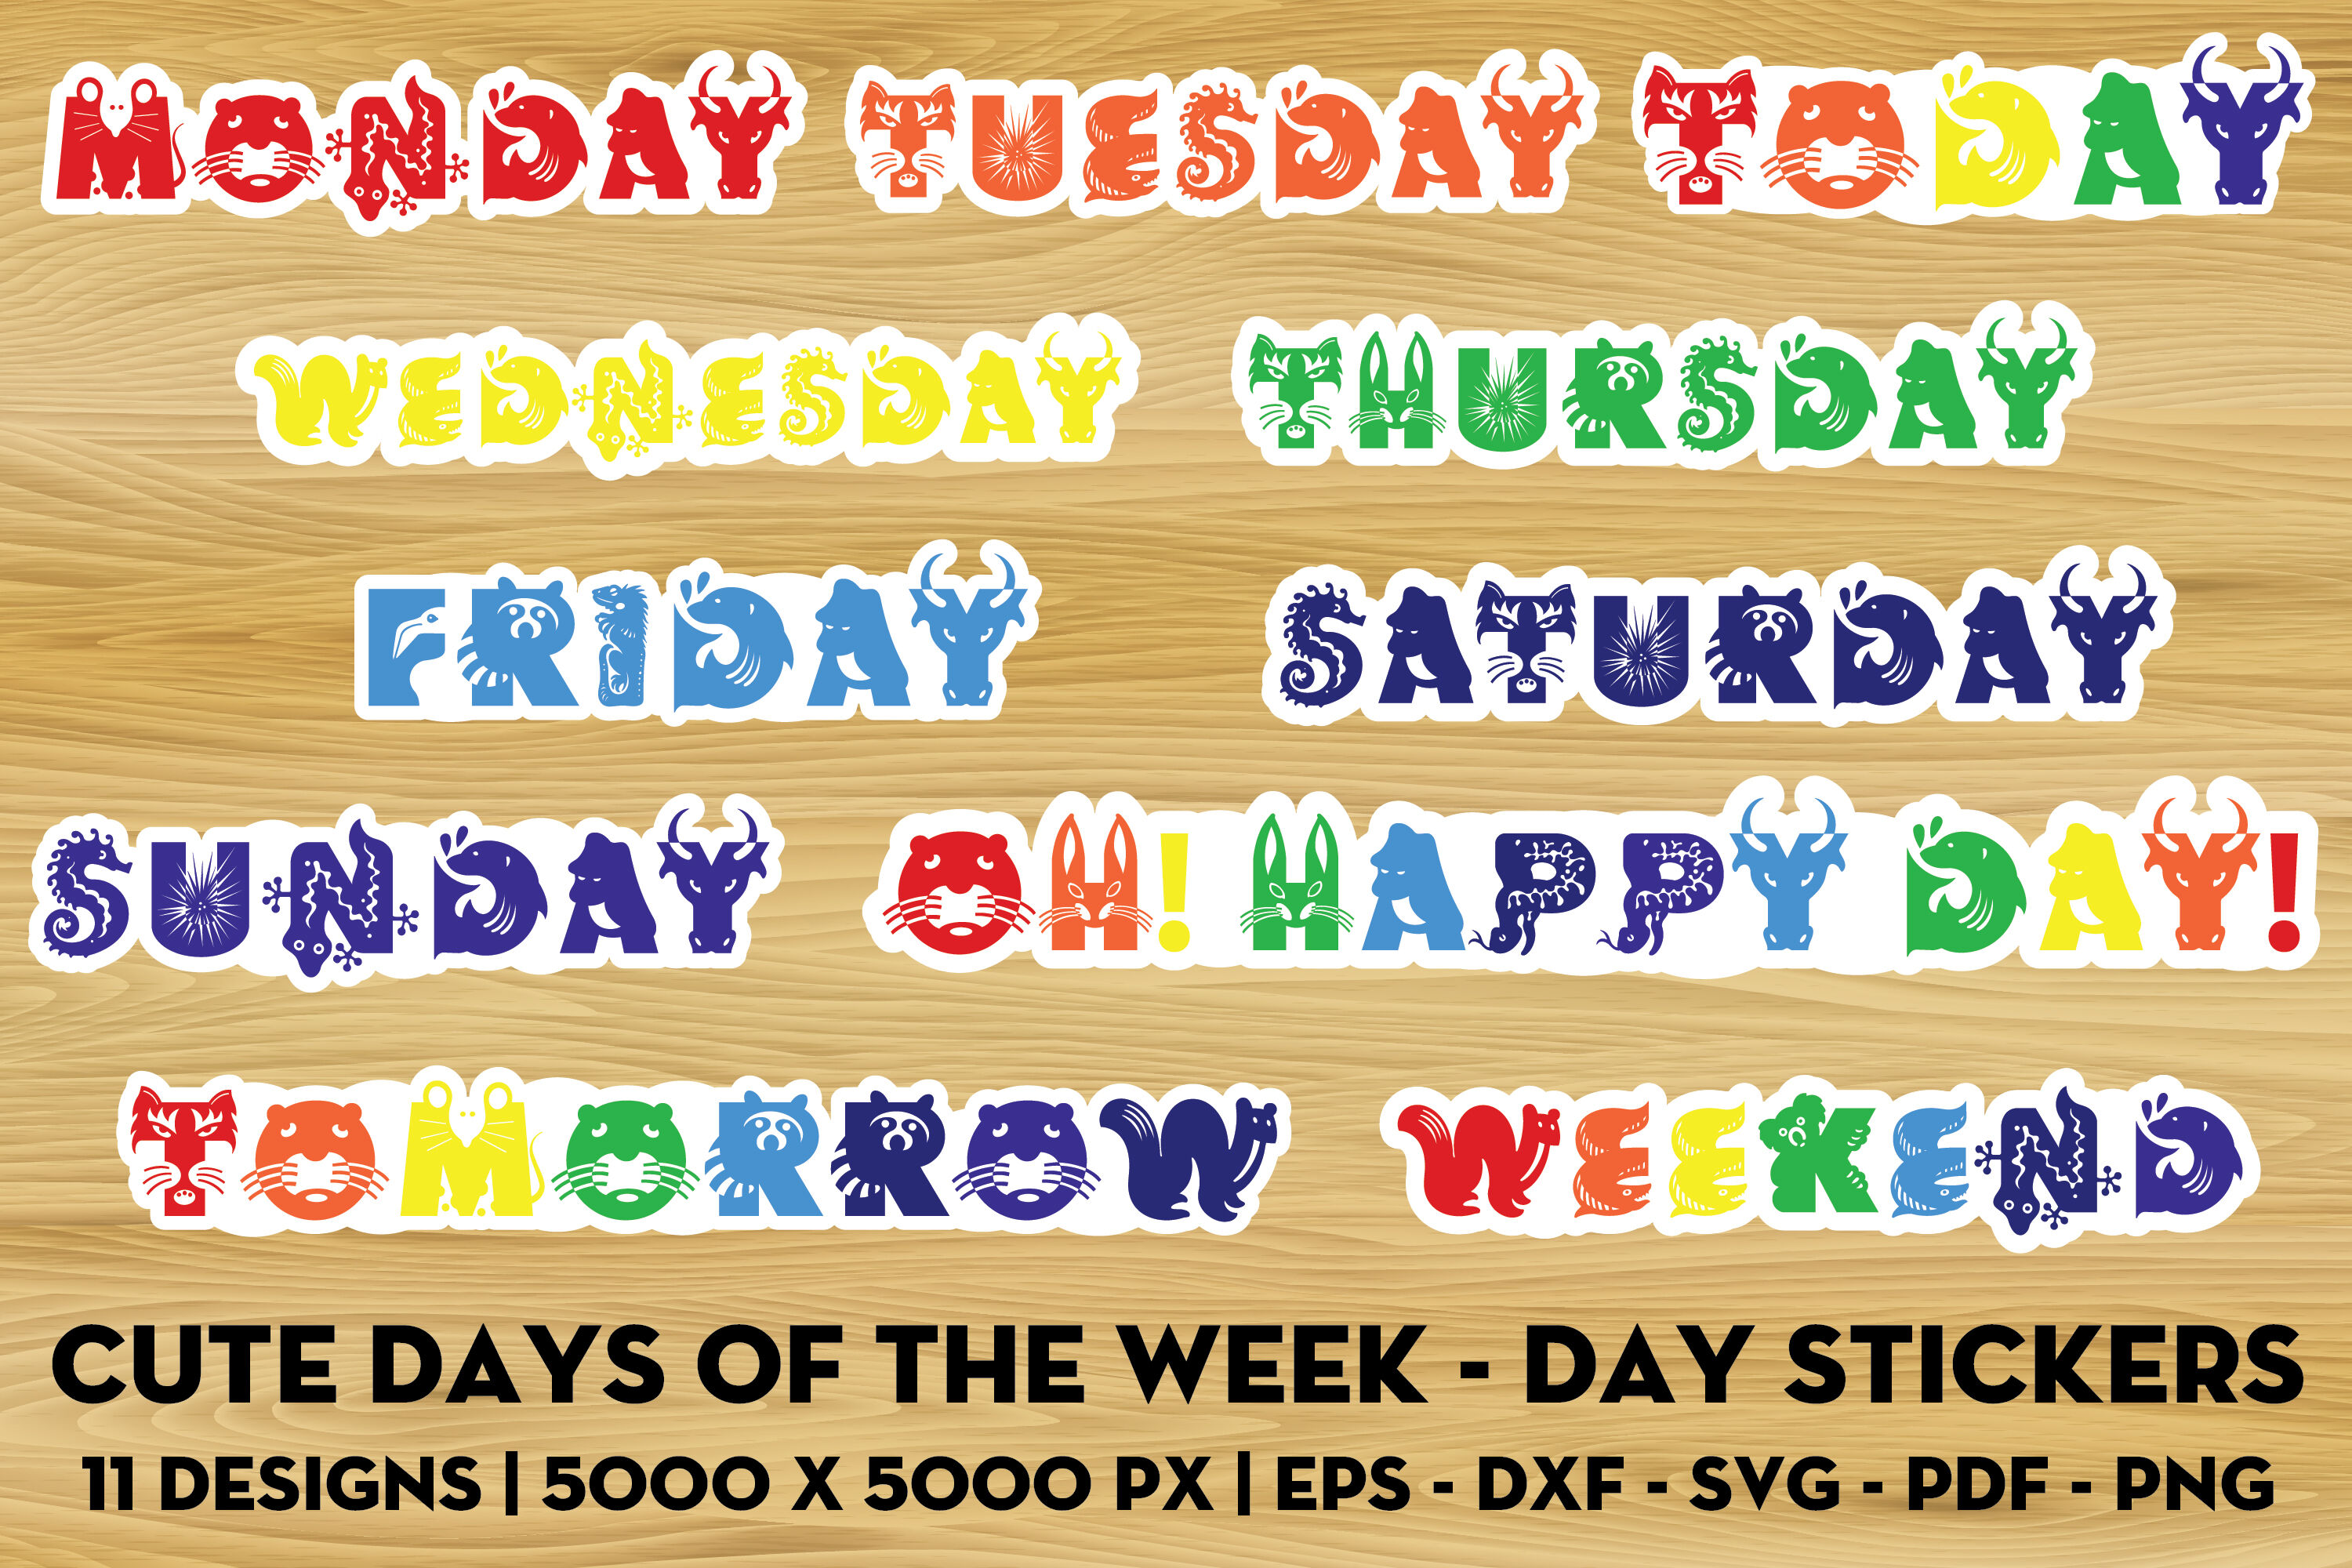 Days Of The Week Stickers, Unique Designs